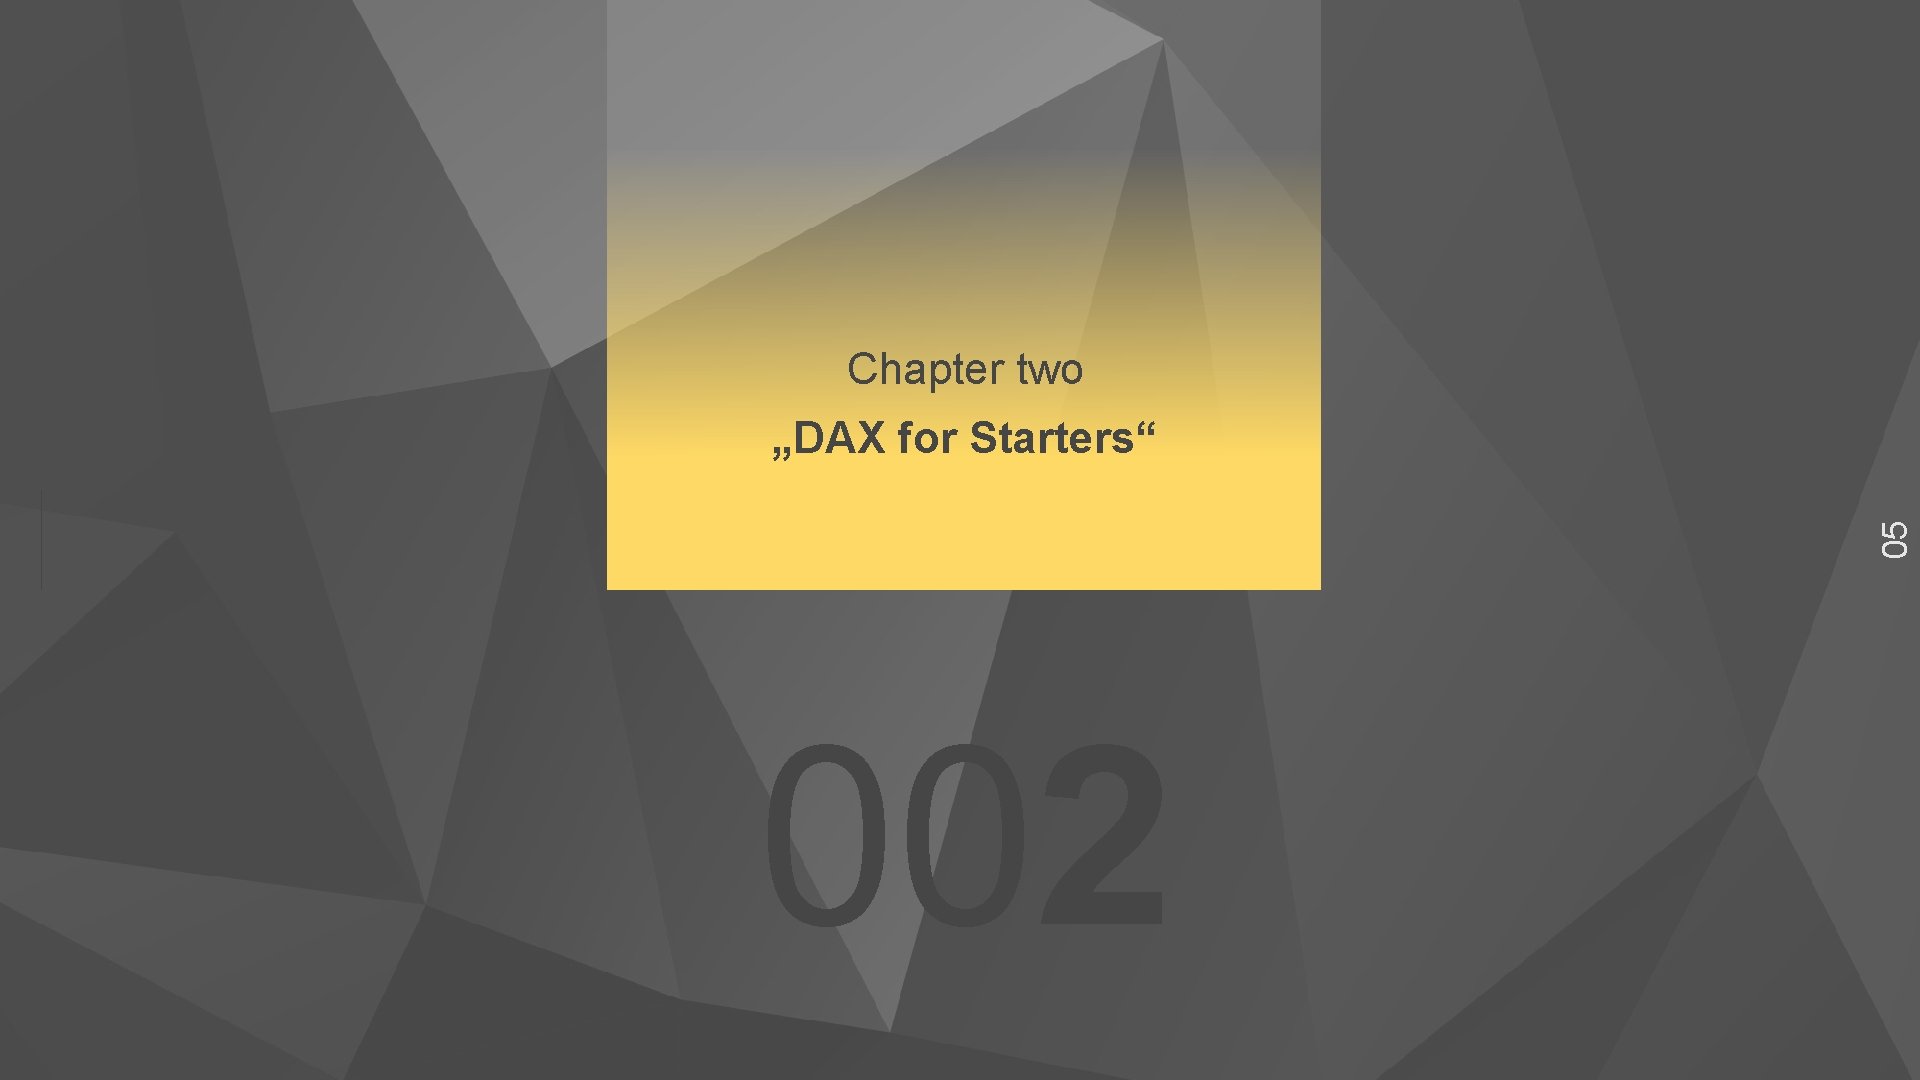 Chapter two 05 „DAX for Starters“ 002 